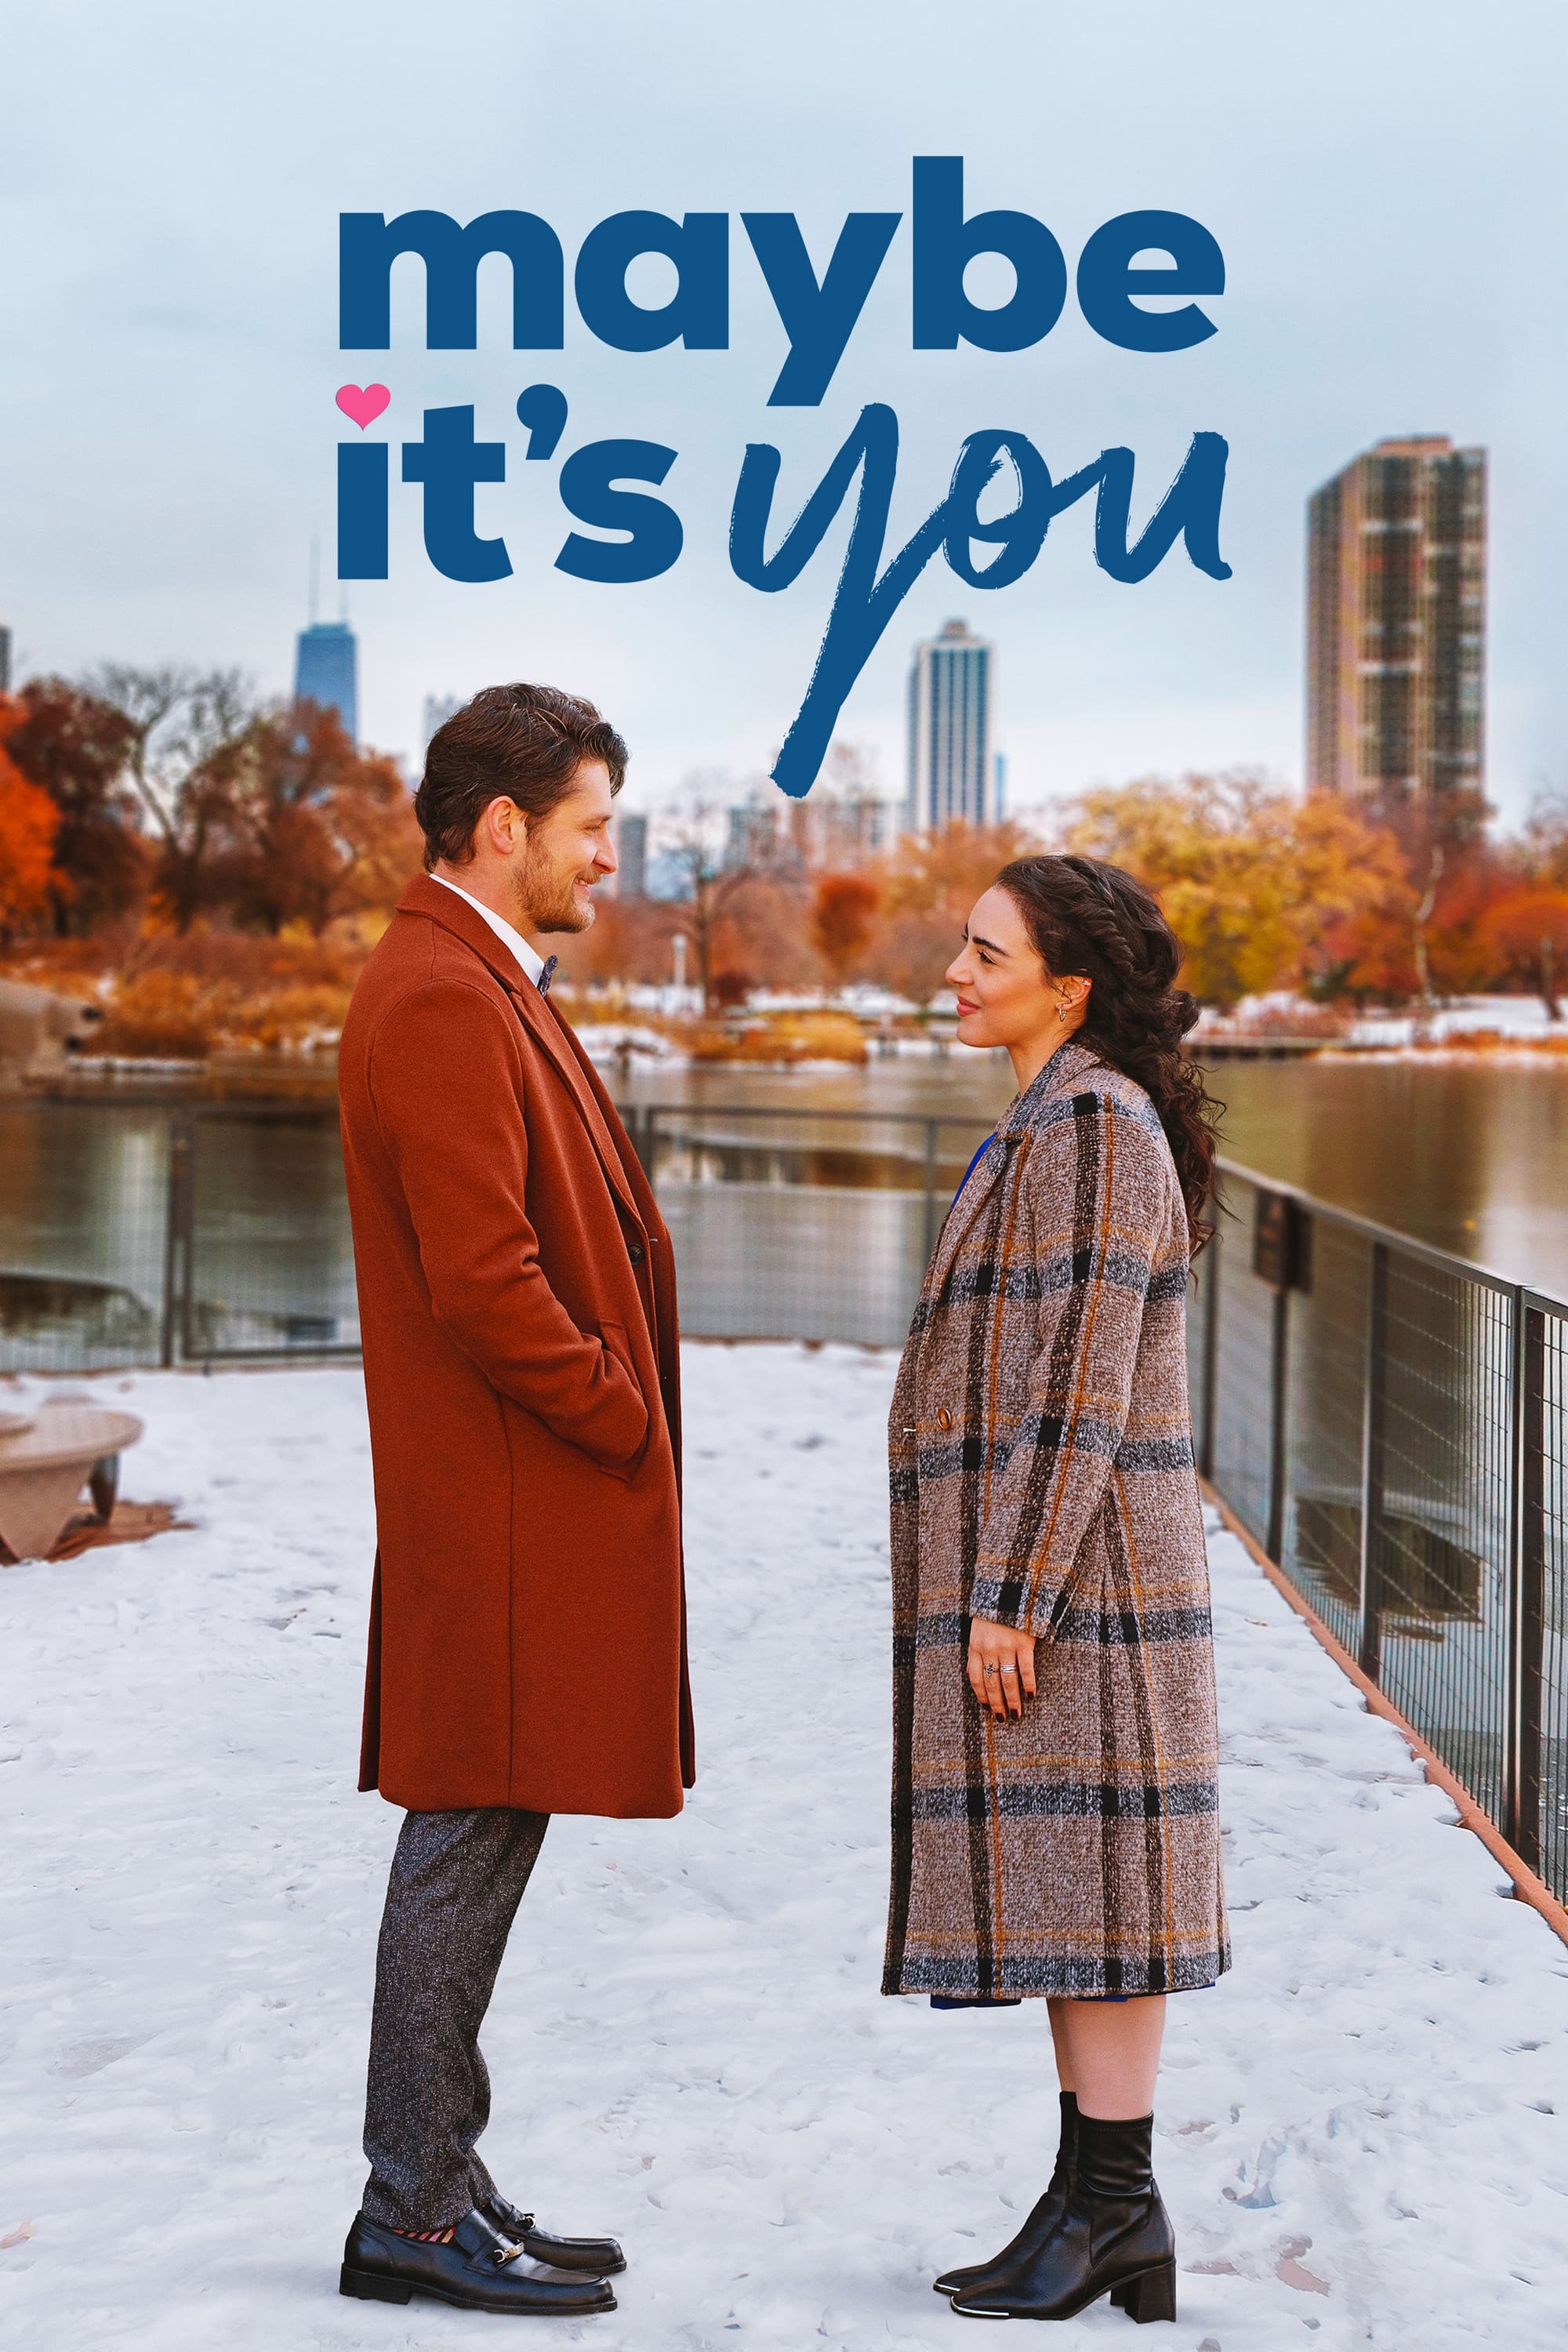 [WATCH 50+] Maybe It's You (2023) FULL MOVIE ONLINE FREE ENGLISH/Dub/SUB Comedy STREAMINGS ������������ Movie Poster